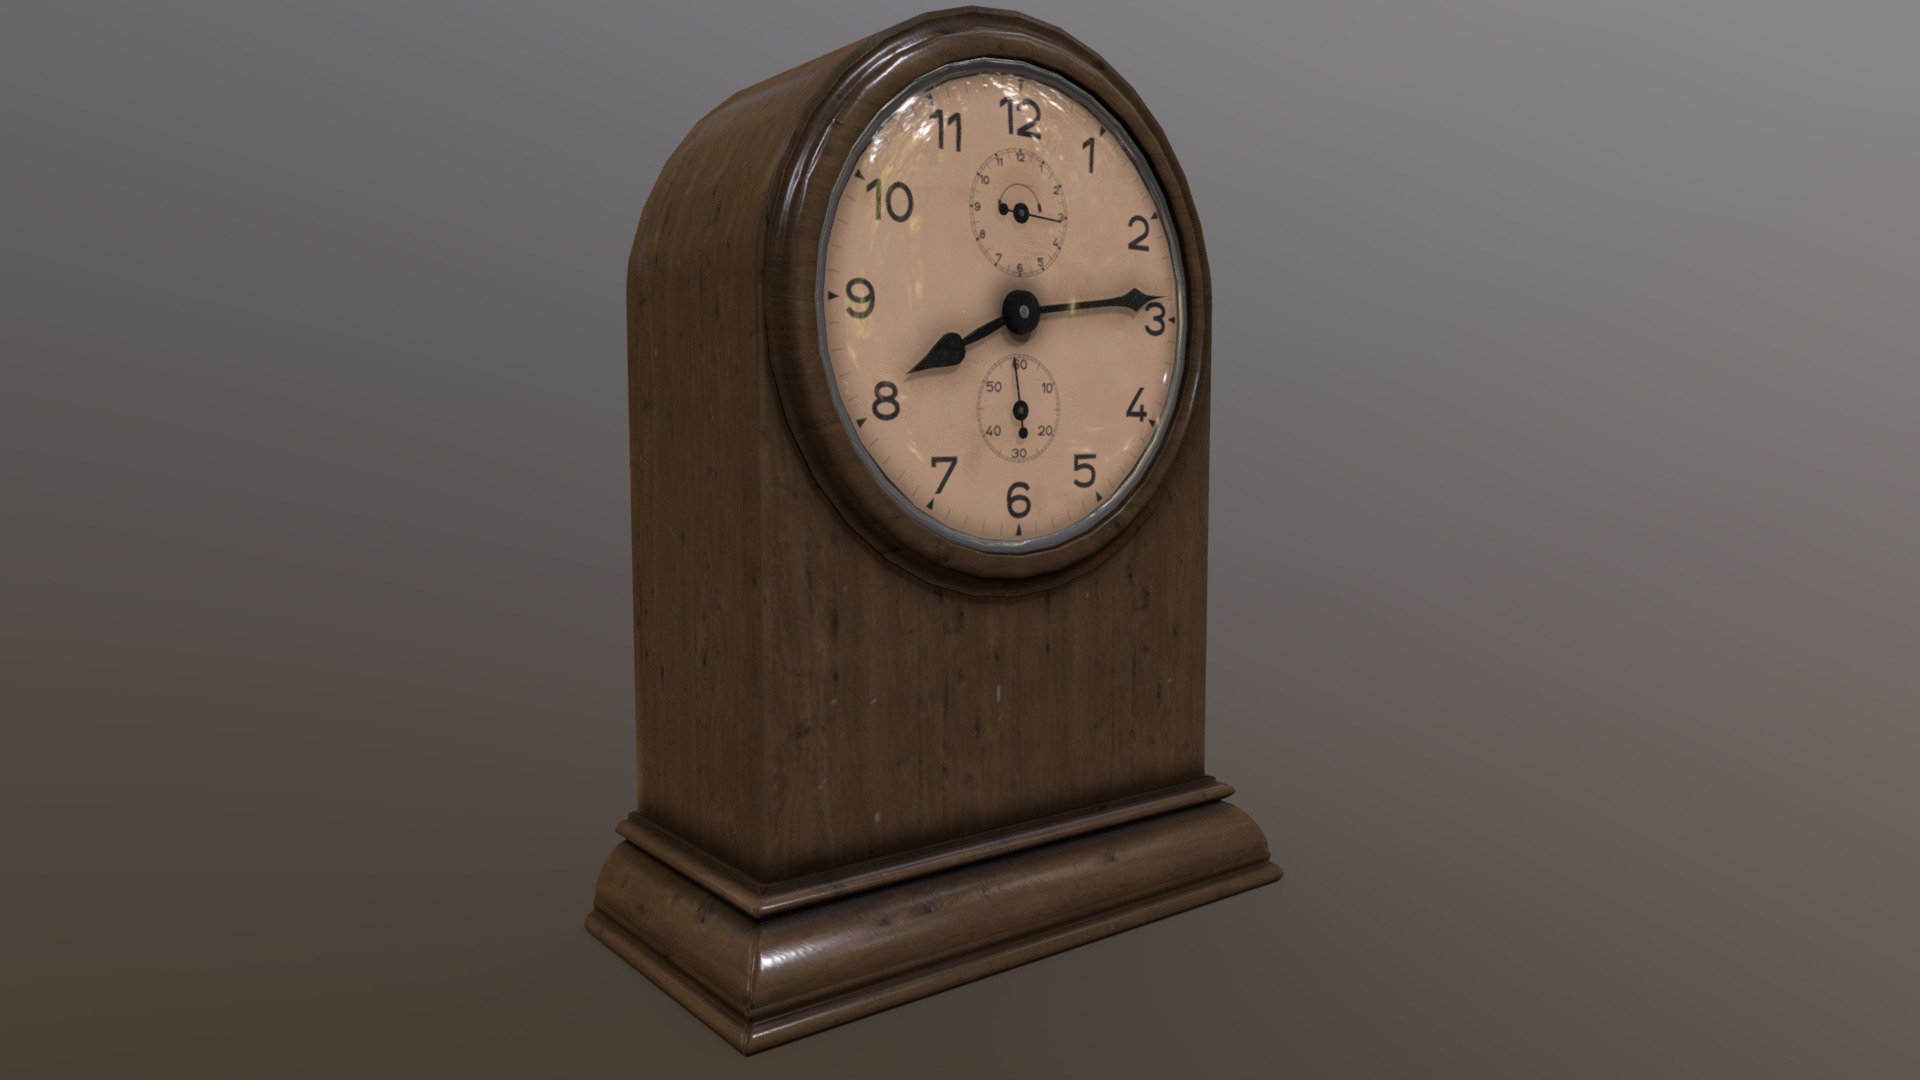 its a clock.
i made clockface in illustrator!
Here it is in real life on my mantelpiece:
 - Antique 1930s Clock - Download Free 3D model by Fishboe (@ministephen) 3d model